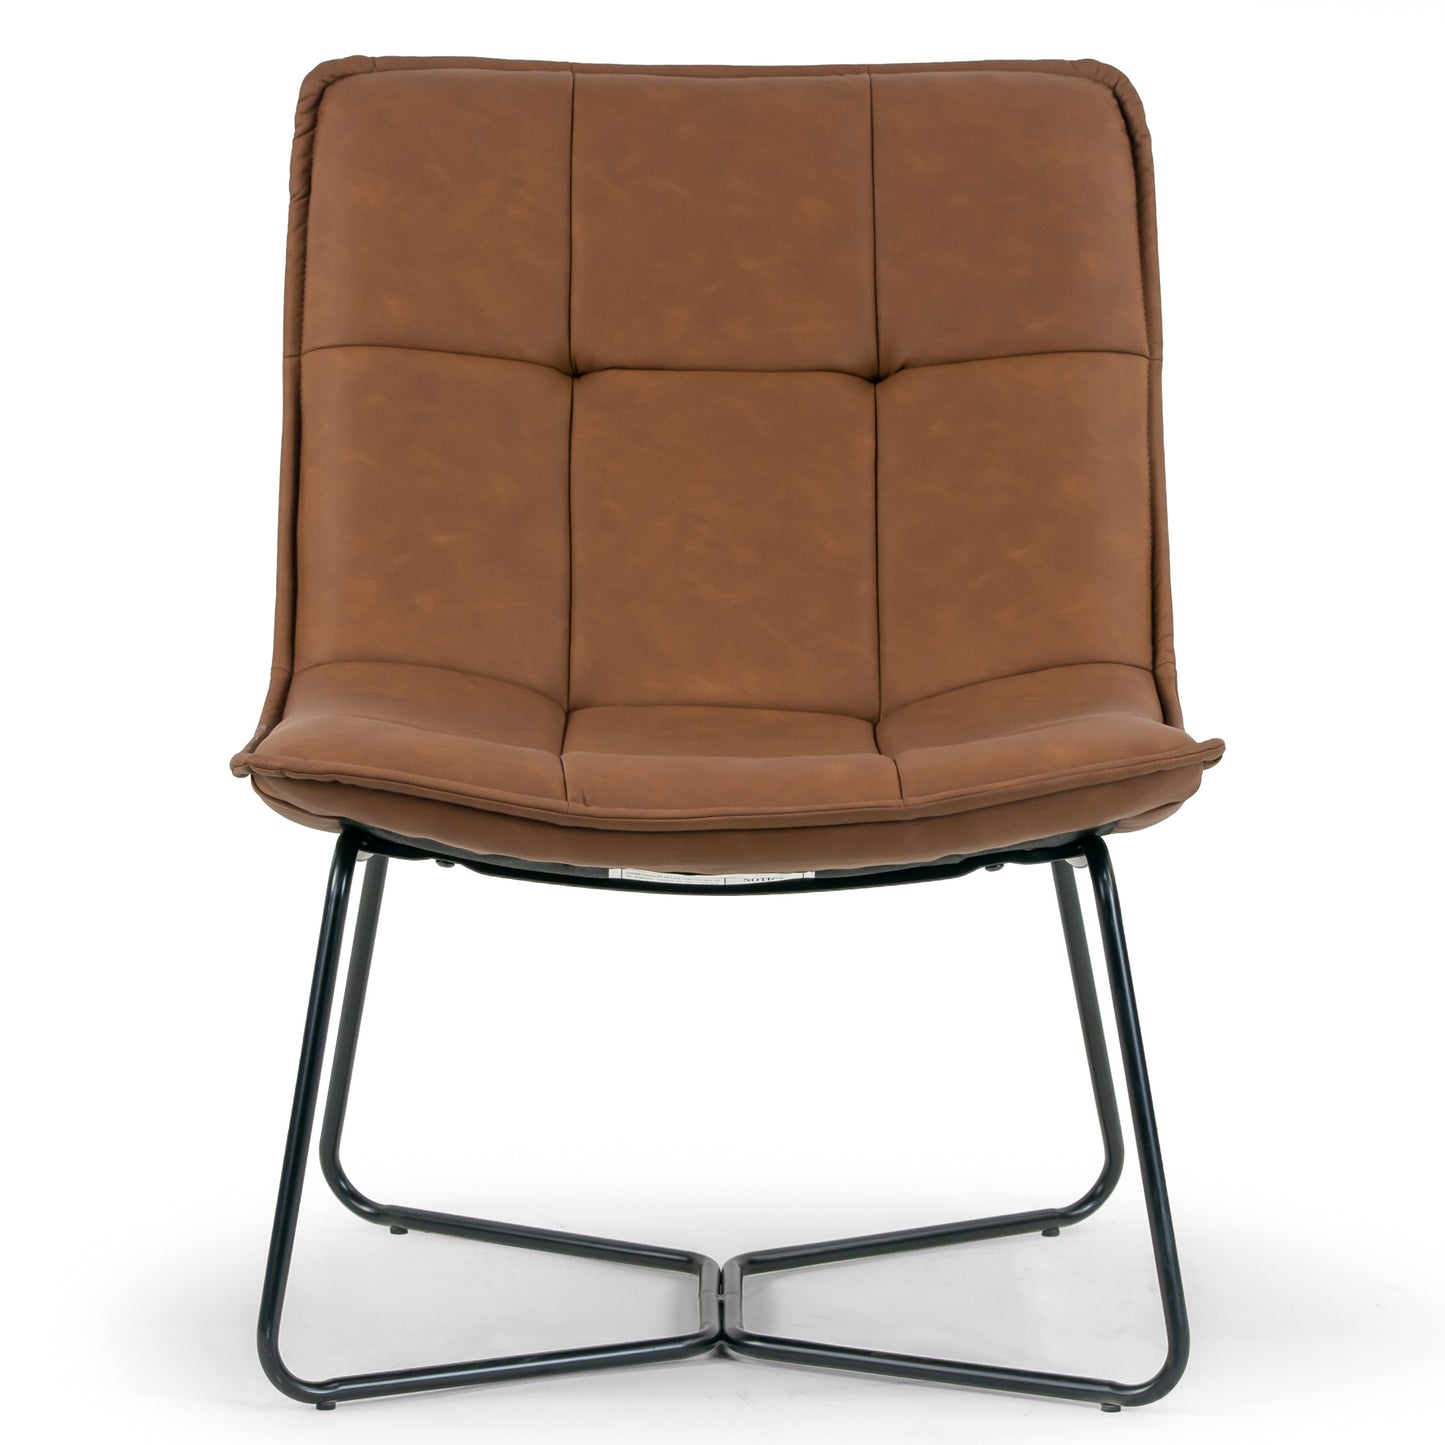 Aurele Light Brown Faux Leather Armless Accent Chair with Black Metal Legs